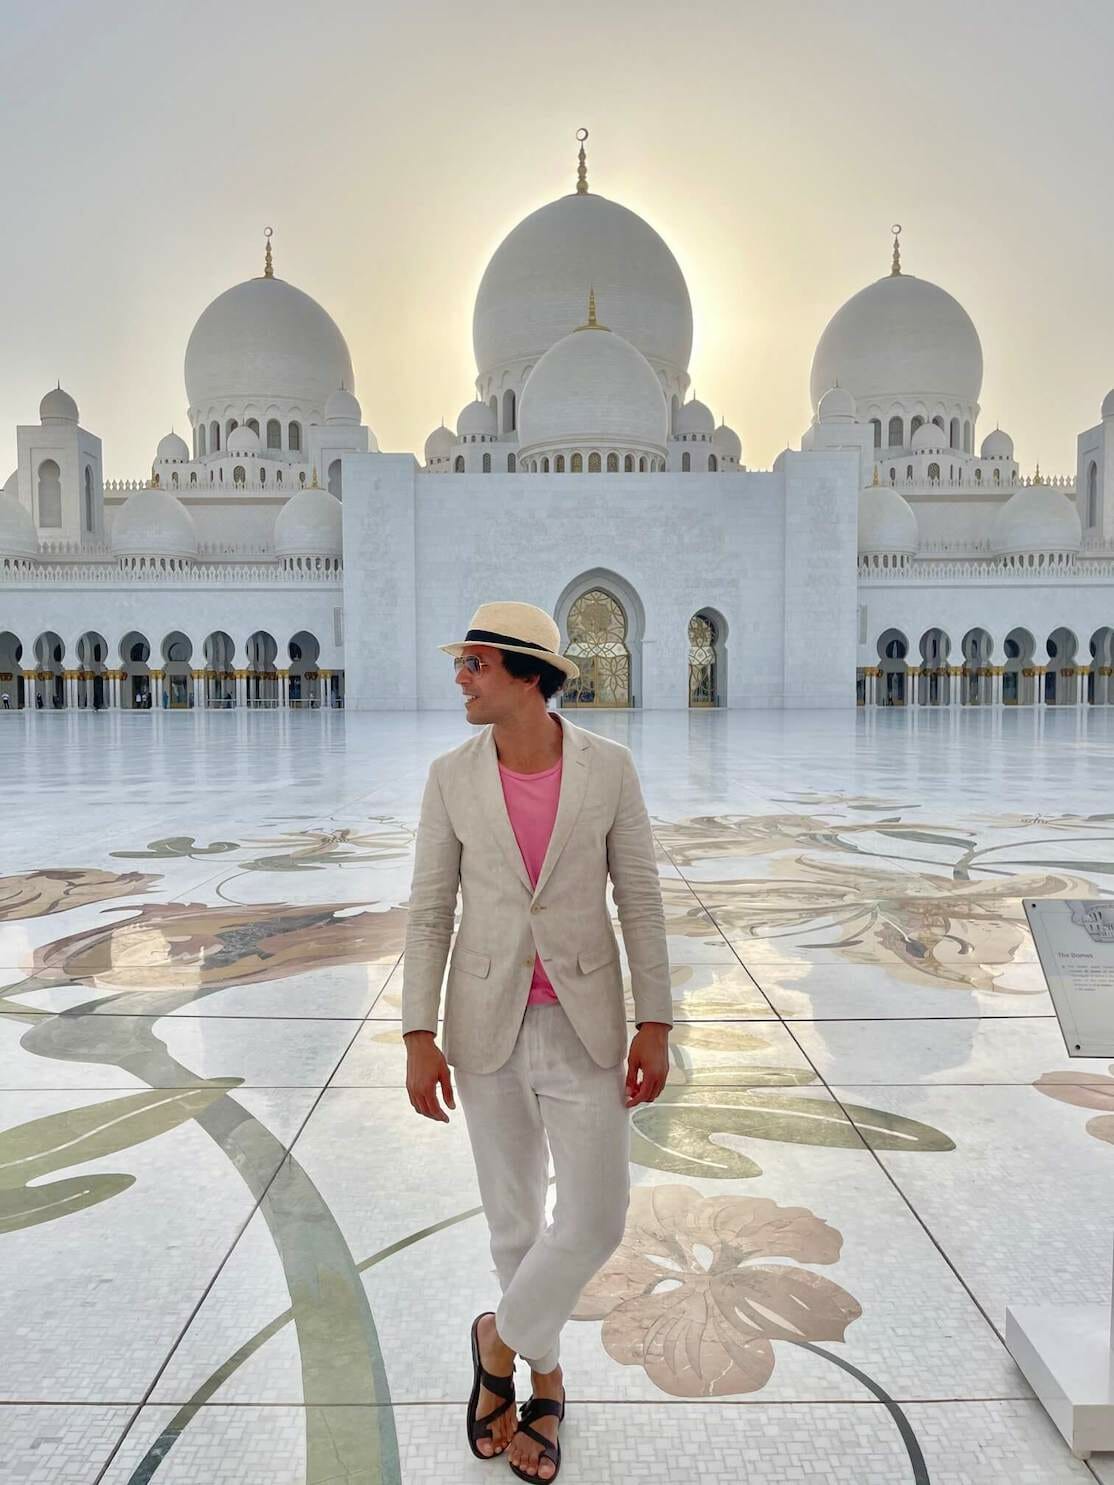 Pericles Rosa posing for a picture at the Sheikh Zayed Grand Mosque, Abu Dhabi